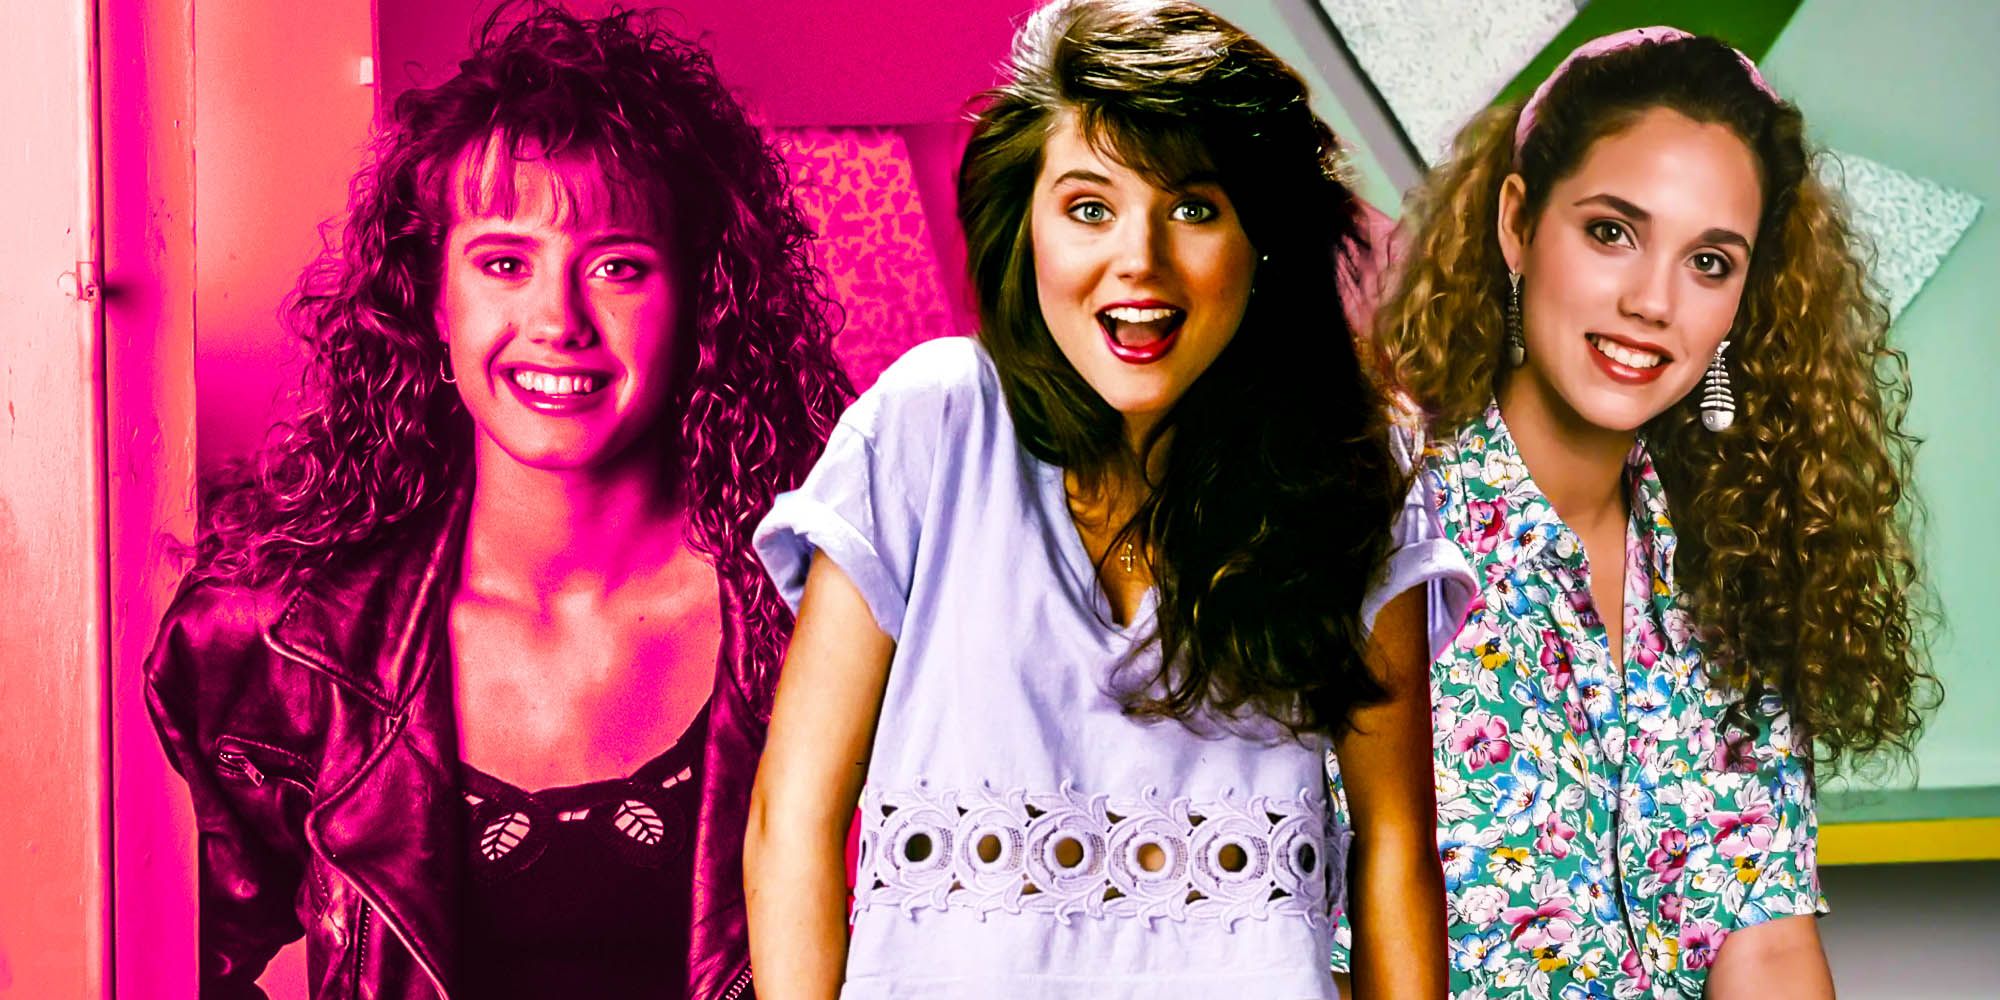 A blended image features Tori, Kelly, and Jessie in Saved By The Bell